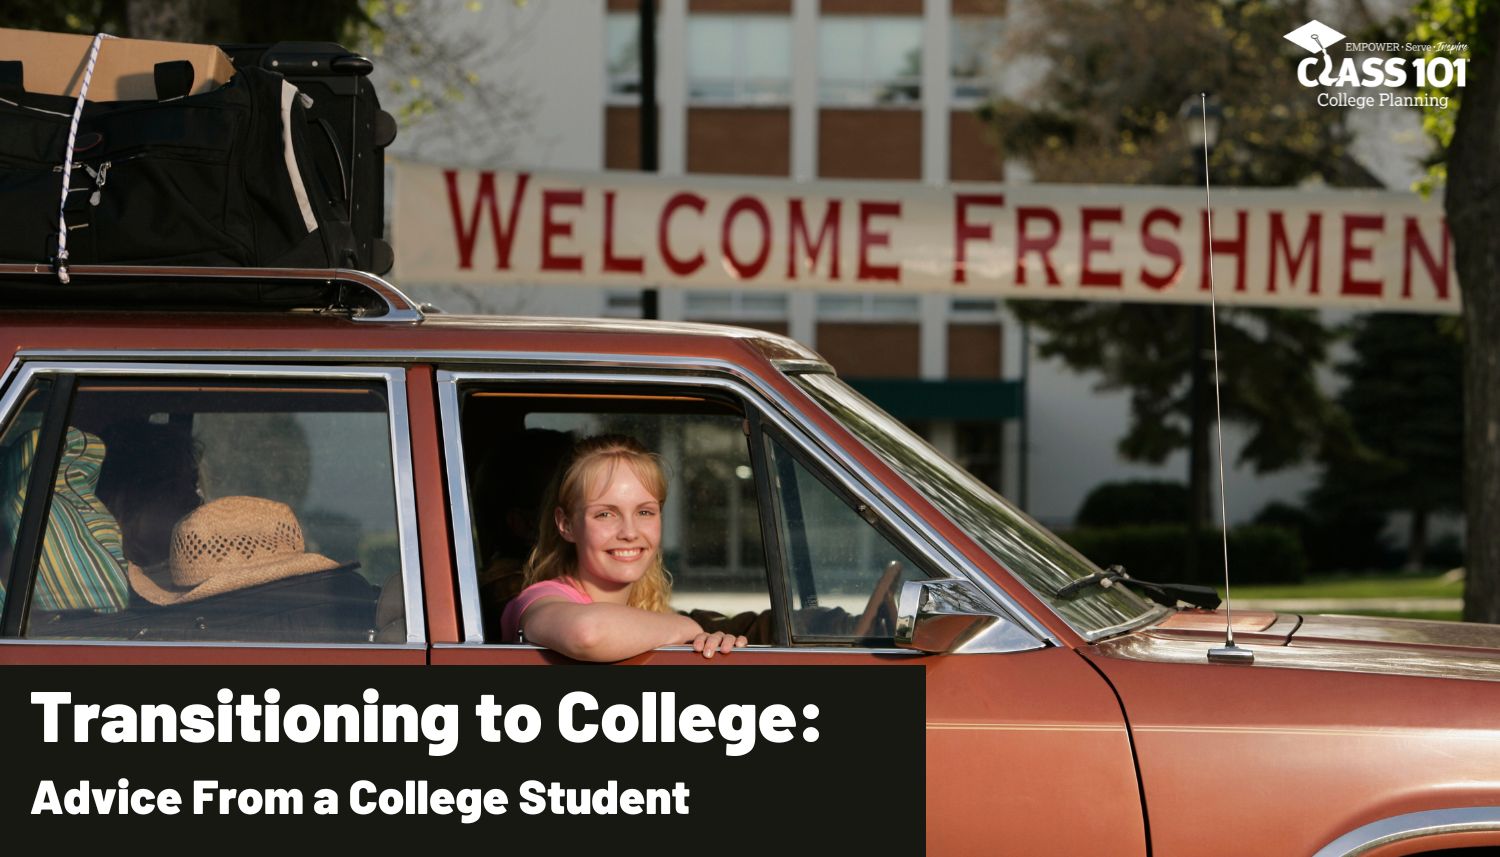 Transitioning to College: Advice From a College Student